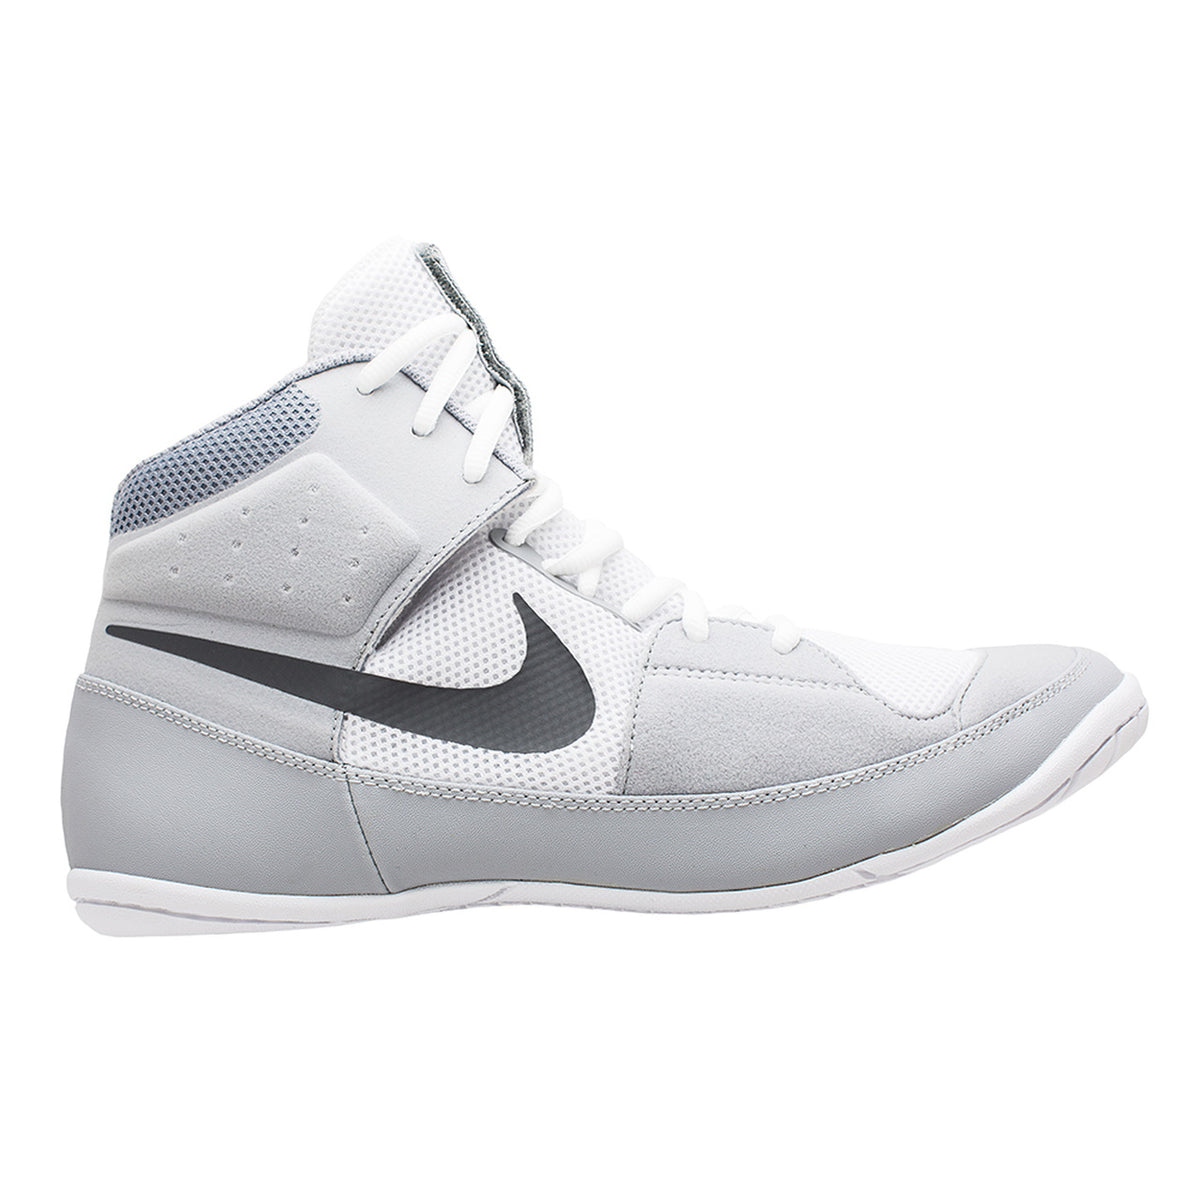 Nike Fury wrestling shoes. The ideal wrestling shoe for beginners and advanced wrestlers. Great quality and traction on the mat. No matter whether in competition or training. With wrestling shoes from Nike you will be at the forefront. Here in the color white/gray.